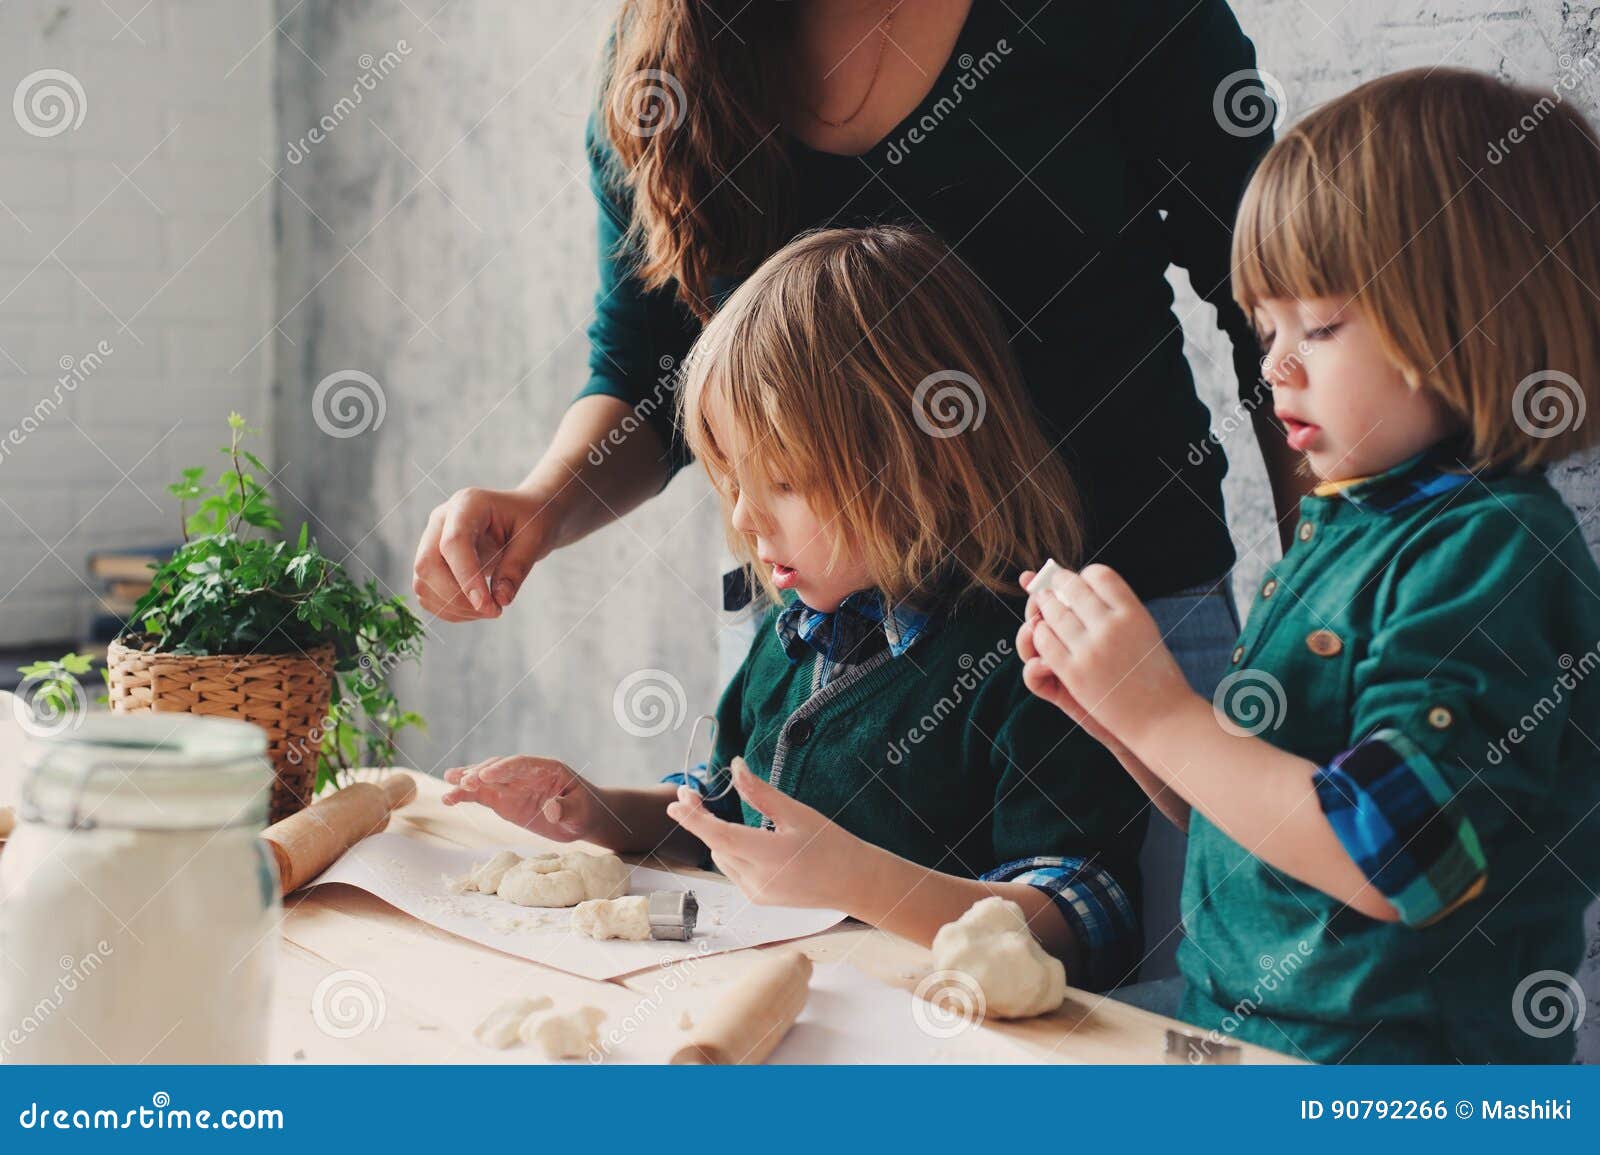 Mother Cooking With Kids In Kitchen. Toddler Siblings Baking Together